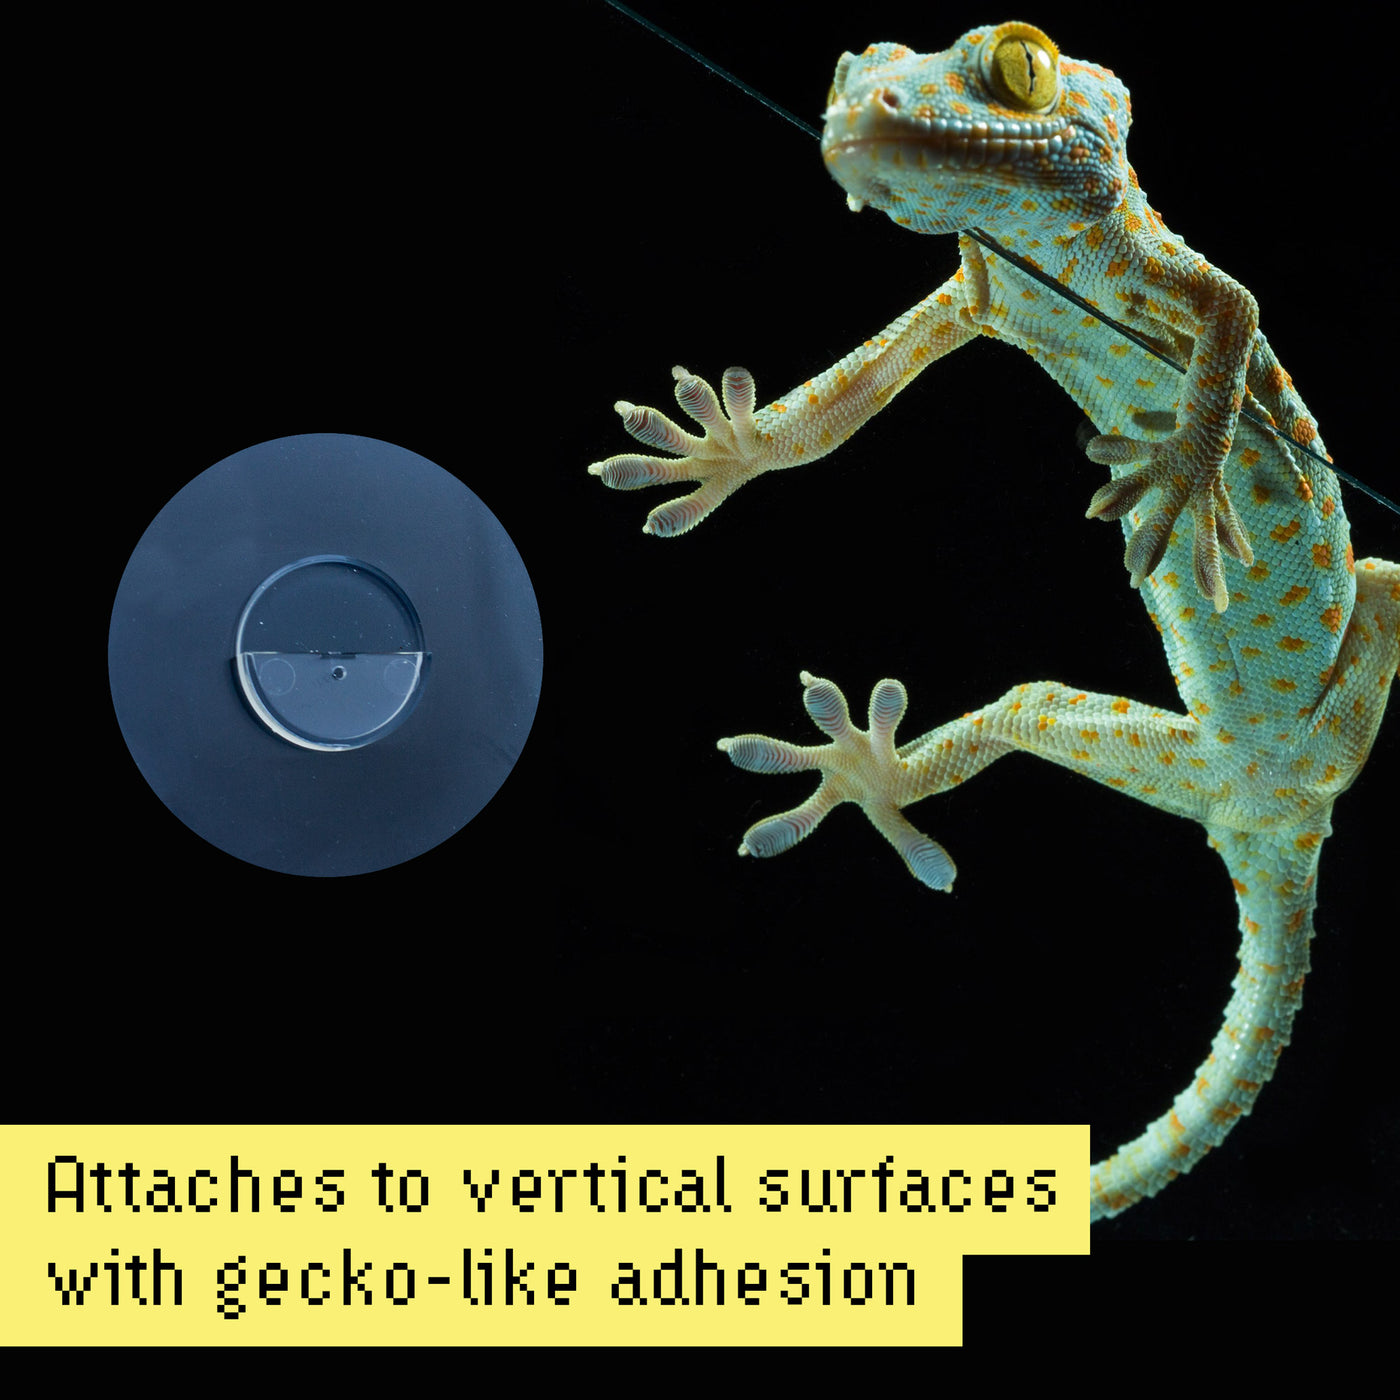 Urbz window attachments are not suction cups. They use a biomimicry design to hold firmly on smooth surfaces like gecko's when they walk up a wall.